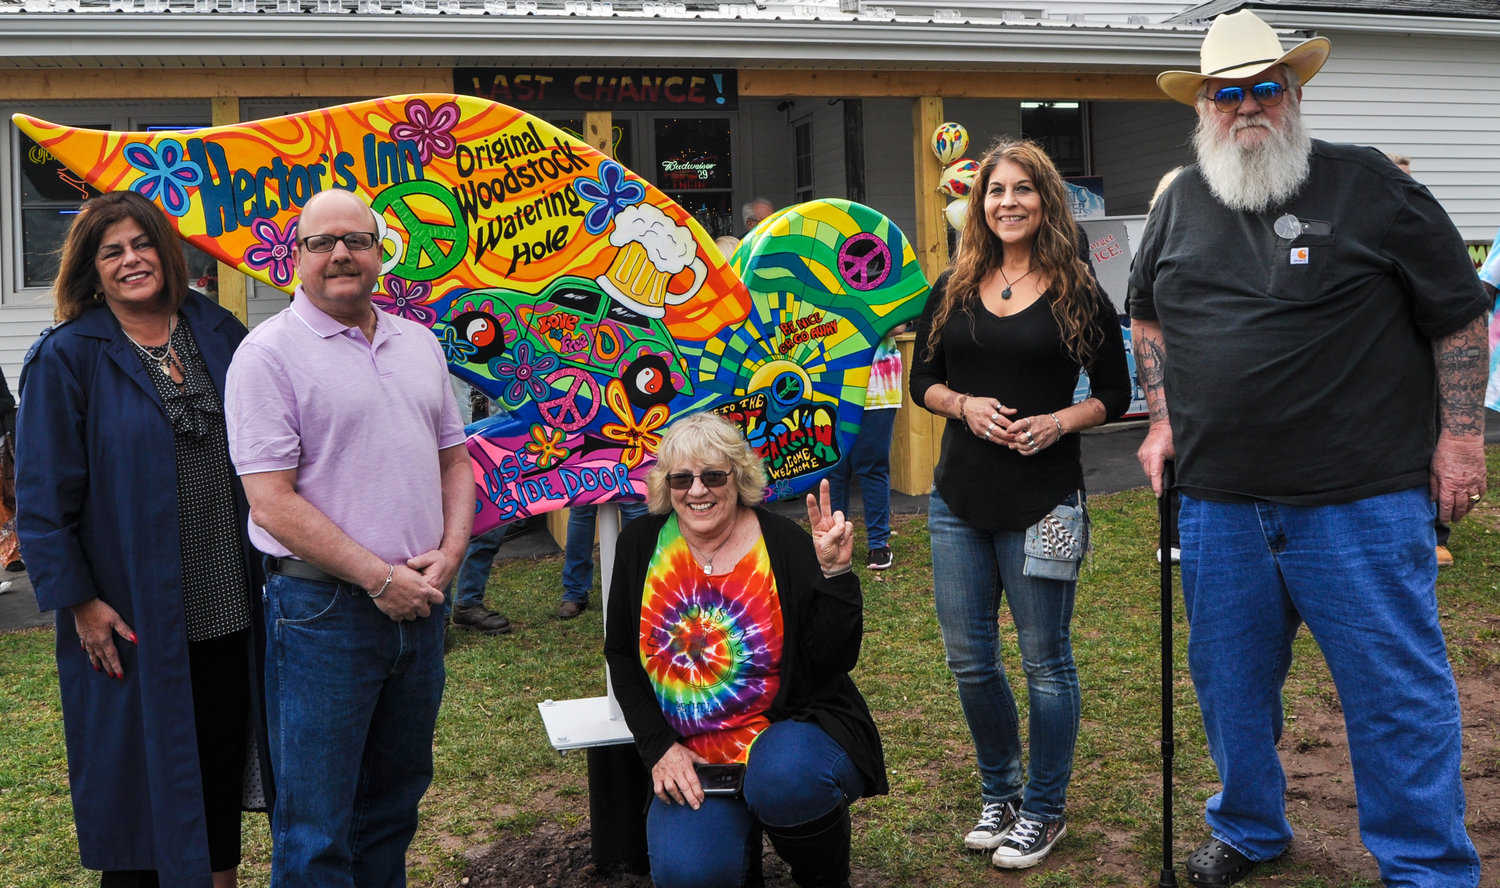 The 50th anniversary celebrations have come and gone, but the Sullivan Catskills Dove Trail is here to stay as a stunning tribute to the 1969 Woodstock Music Festival. Proprietor Bonnie Lagoda, center, flanked by SCVA President Roberta Byron Lockwood, left, and Town of Bethel Supervisor Dan Sturm joined dove artist Kim Simons and Woodstock icon Duke Devlin at the unveiling of the very first dove, located at Hectors Inn in Bethel, NY